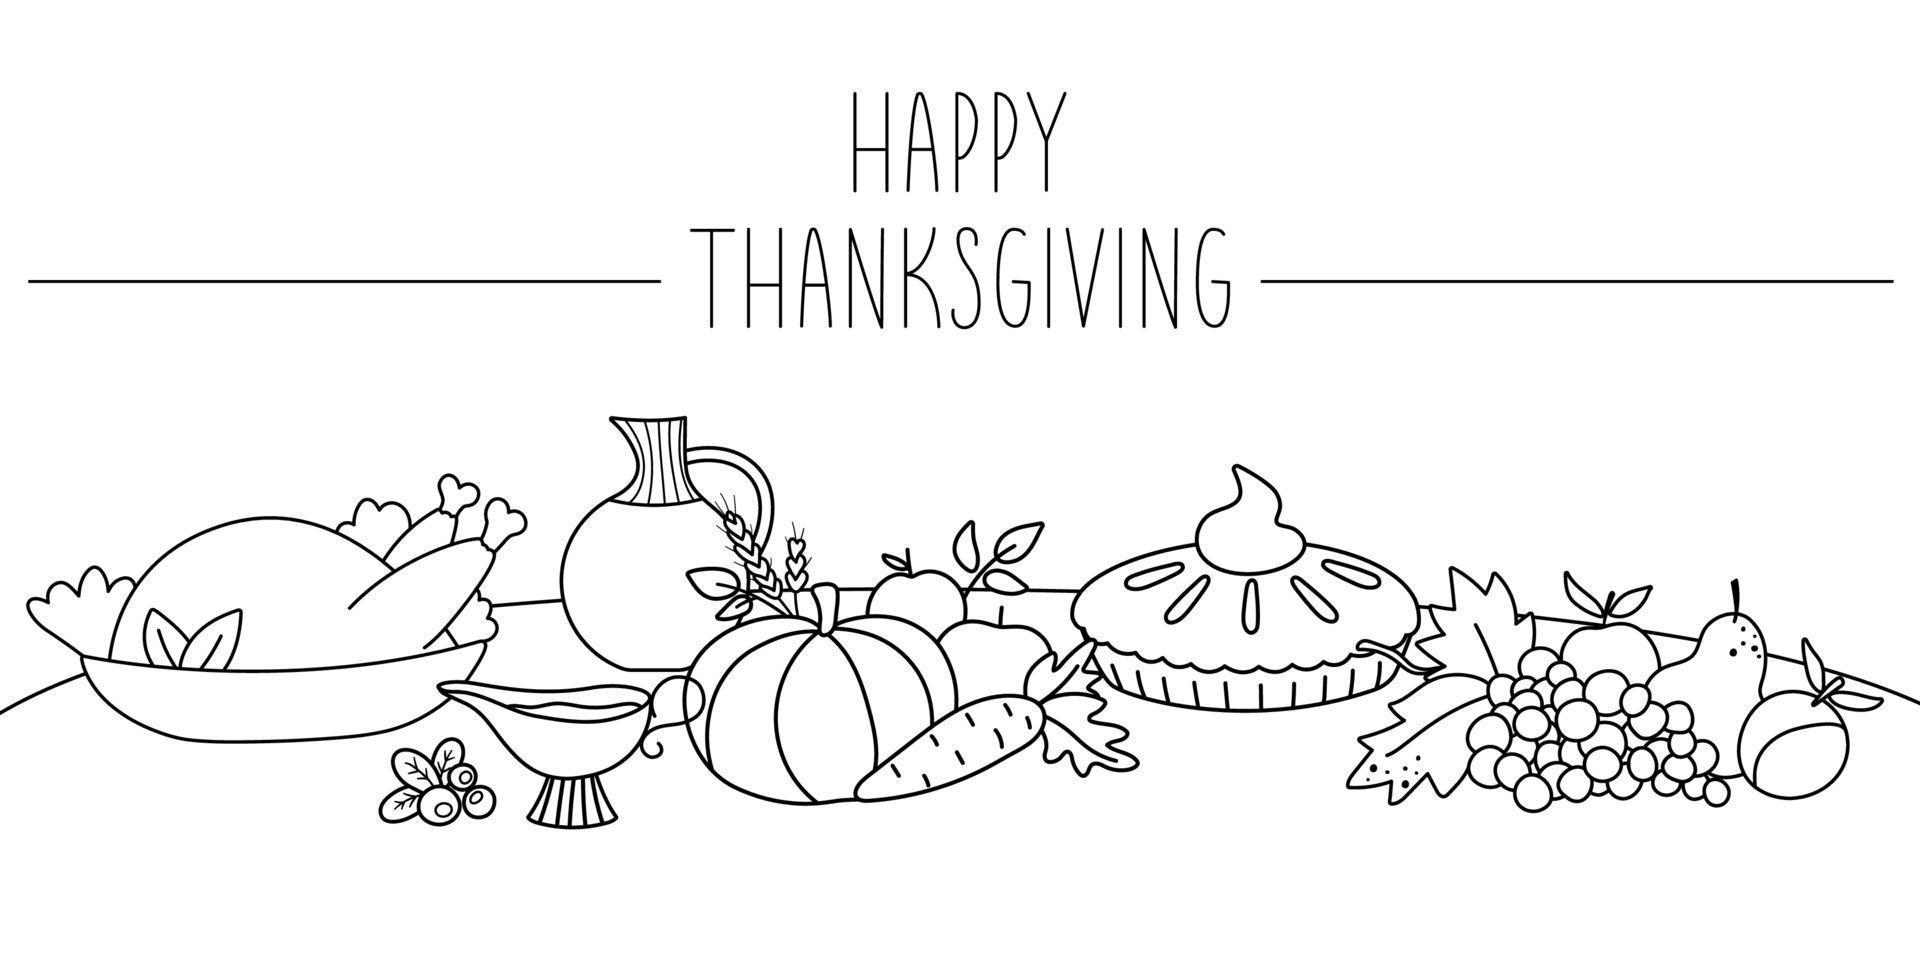 Vector black and white scene with traditional Thanksgiving or Christmas desserts and dishes on a table. Autumn line holiday festive meal illustration. Fall food collection with turkey, pumpkin pie